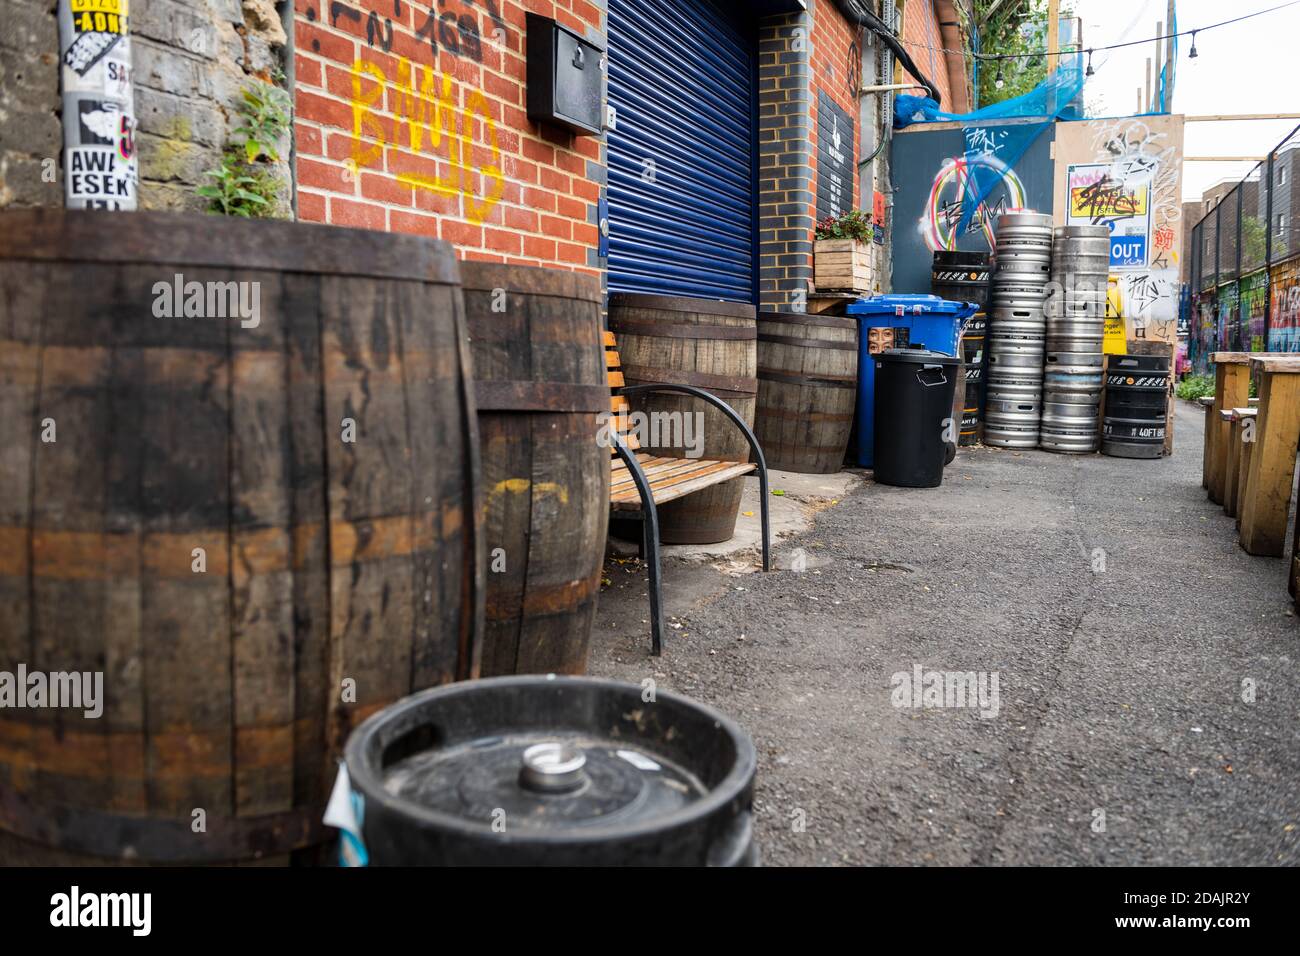 A micro brewery and bar in London East End. Stock Photo